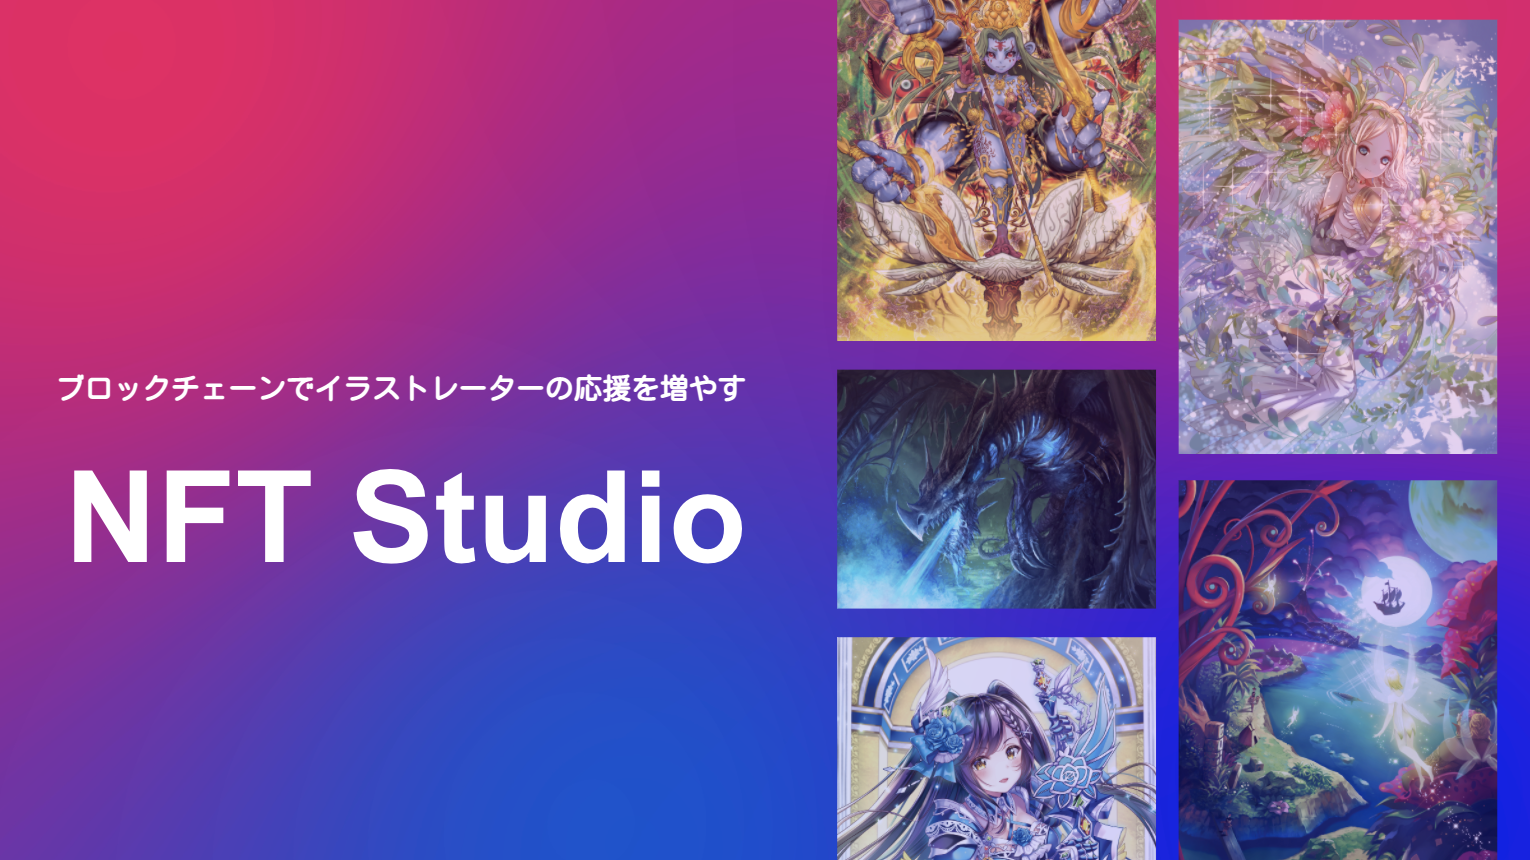 ” NFT Studio” to increase the support of illustrators on the blockchain. Three famous Japanese painters will participate.